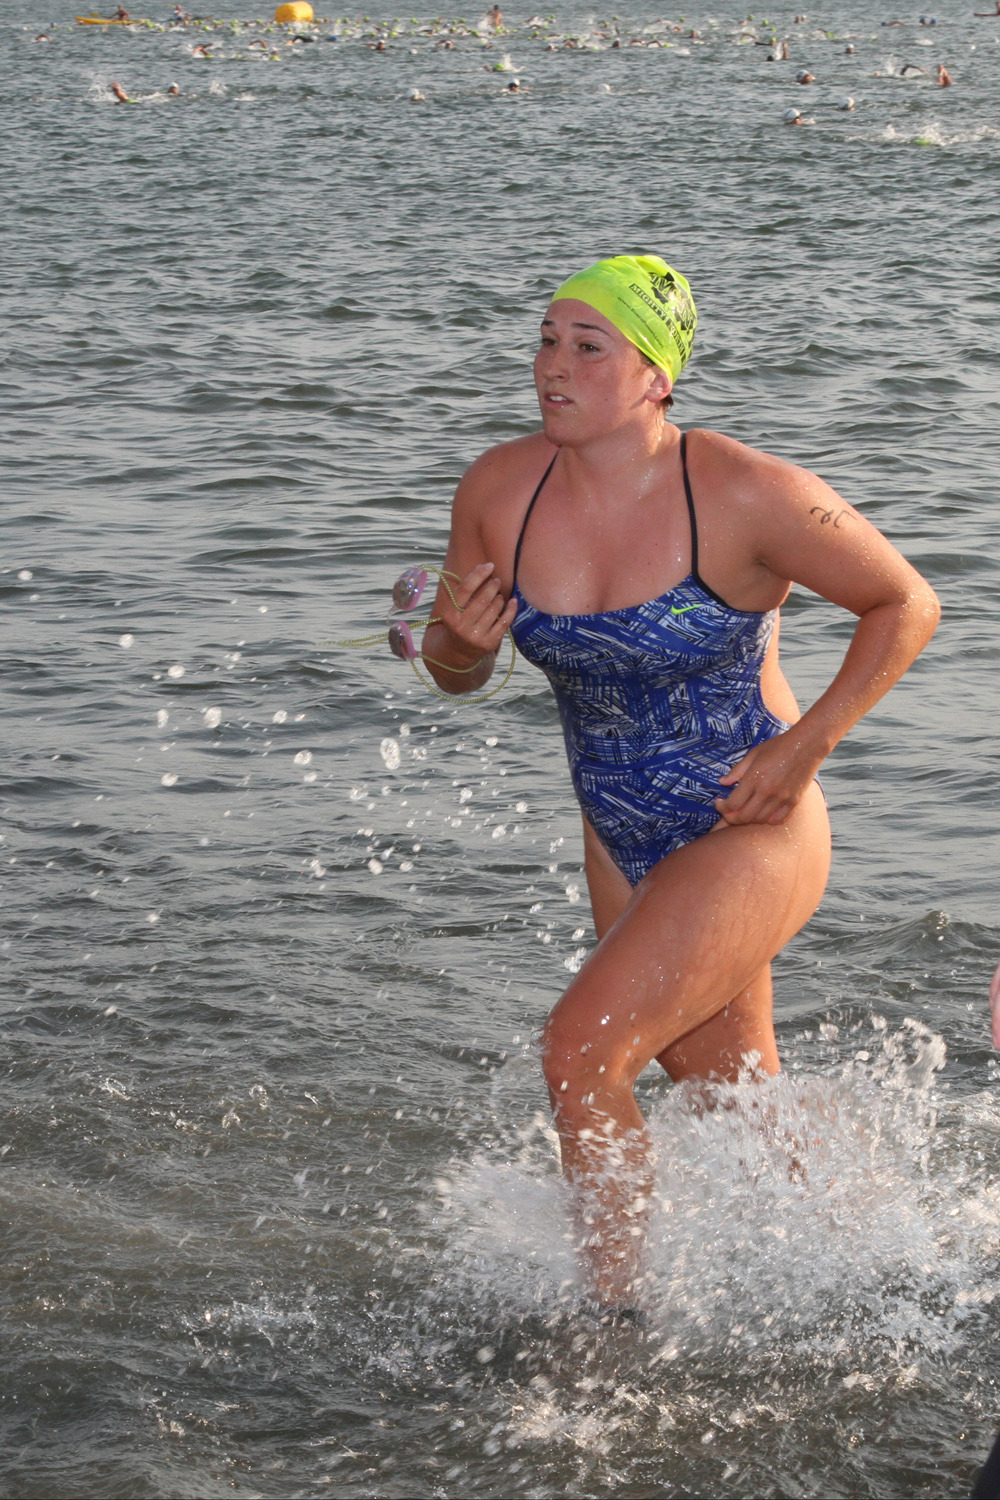 Kelsey Buonaiuto of Miller Place was the first woman out of the water after the swim leg. (Credit: Daniel De Mato)